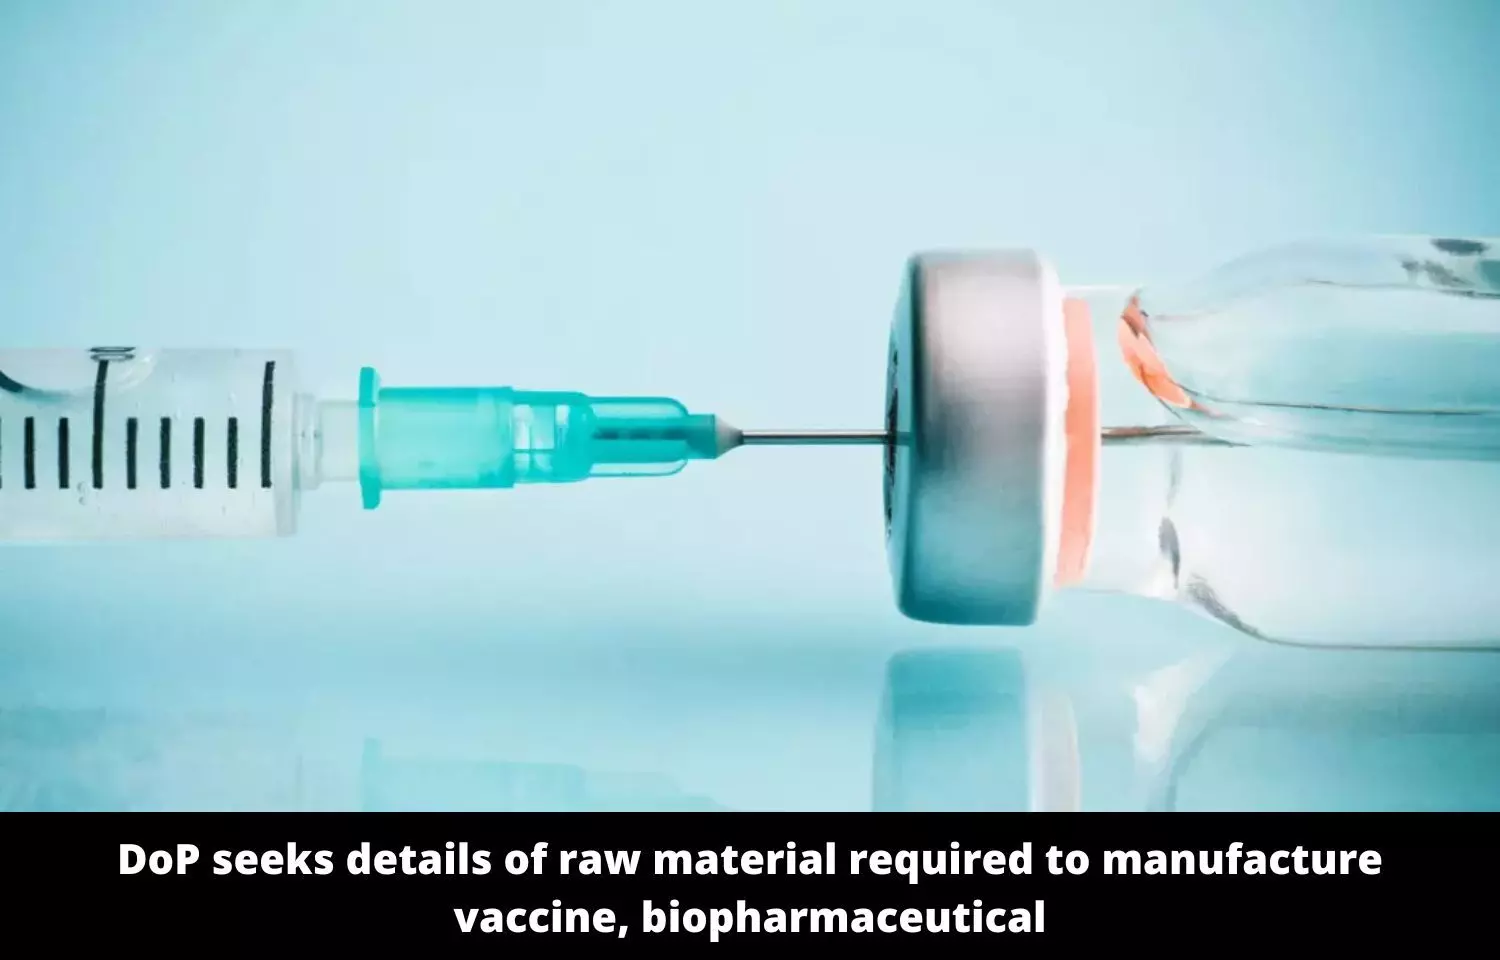 DoP seeks details of raw material required to manufacture vaccine, biopharmaceutical